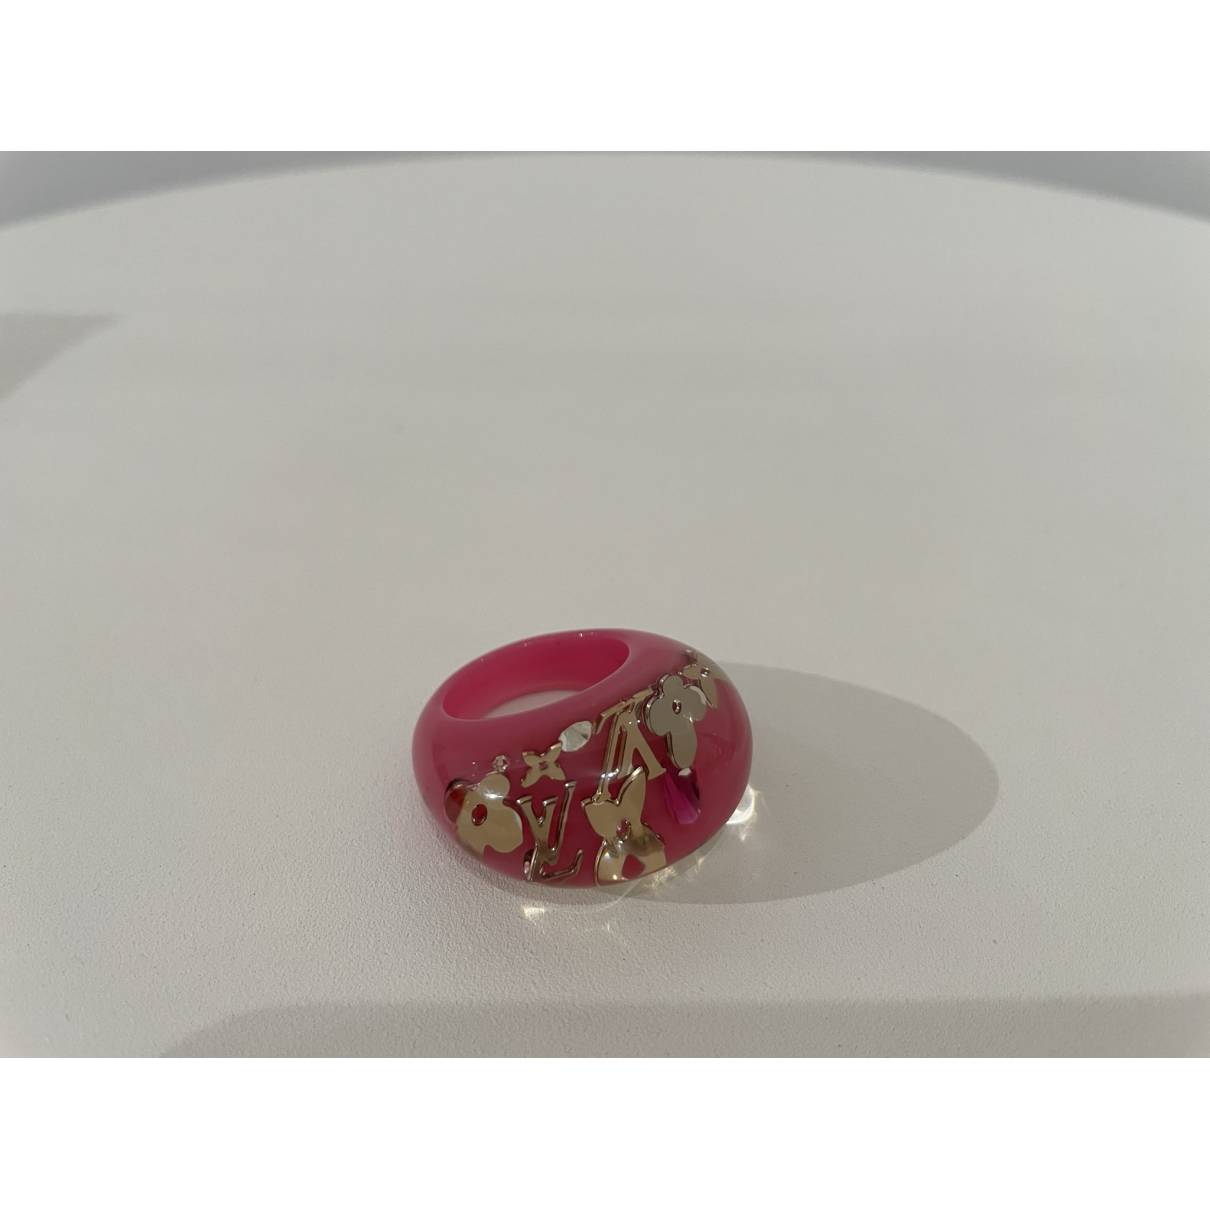 Louis Vuitton - Authenticated Inclusion Ring - Plastic Pink for Women, Never Worn